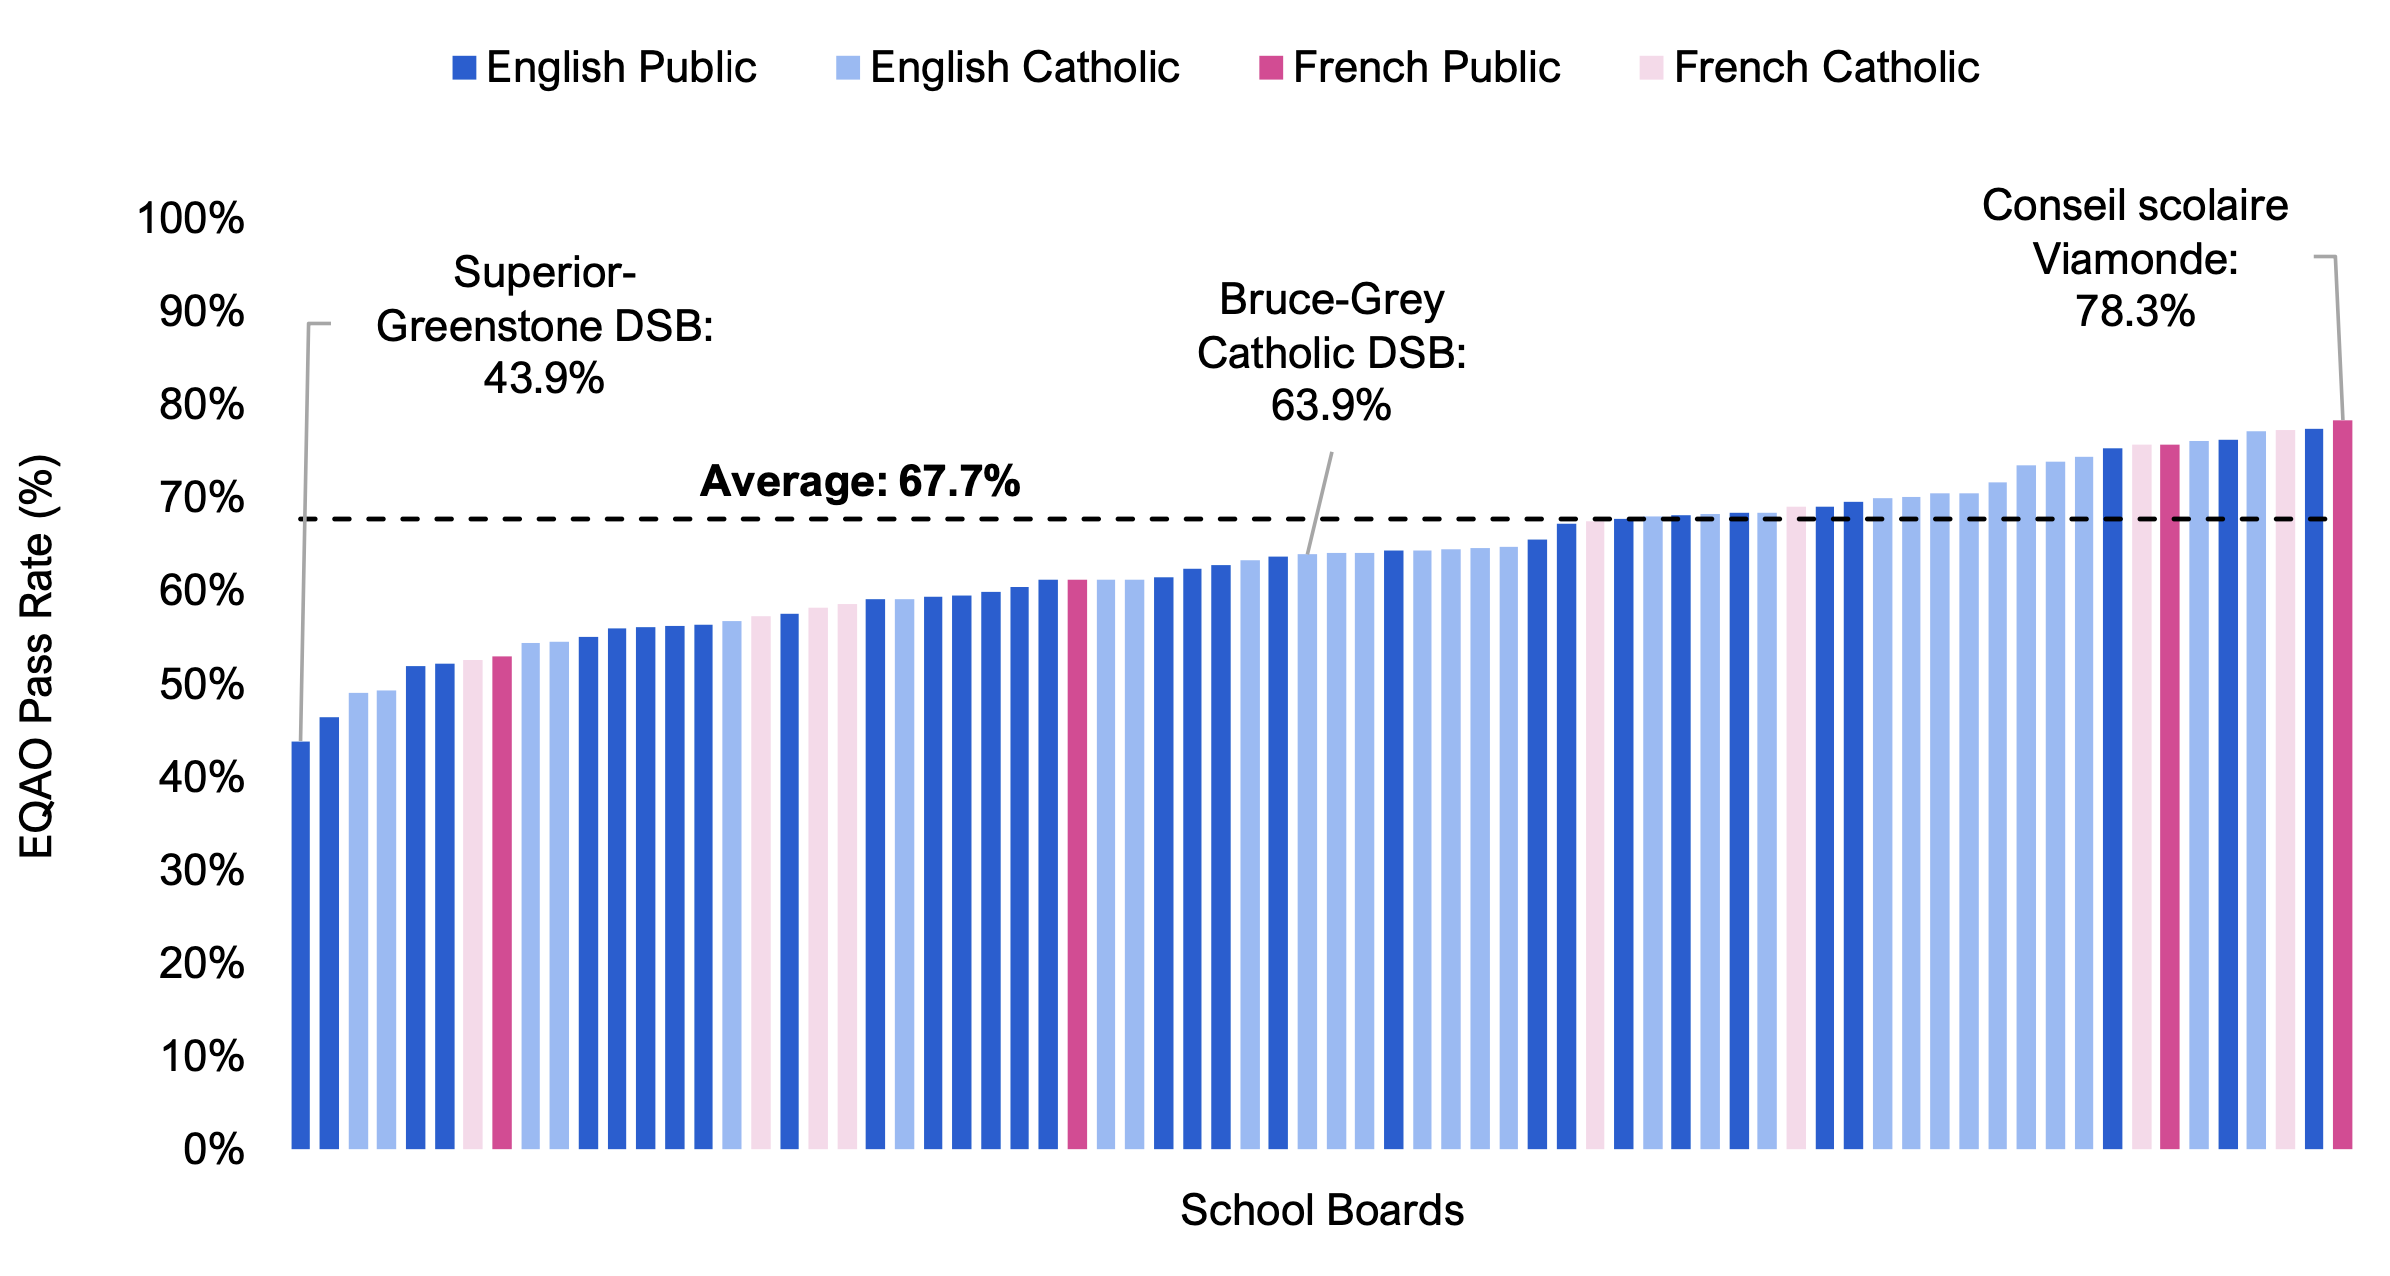 Figure 8.2 shows EQAO average pass rates by school board, broken down by school system. The values range from a low of 43.9 per cent for the Superior-Greenstone DSB to a high of 78.3 per cent for the Conseil scolaire Viamonde, with an overall average of 67.7 per cent.